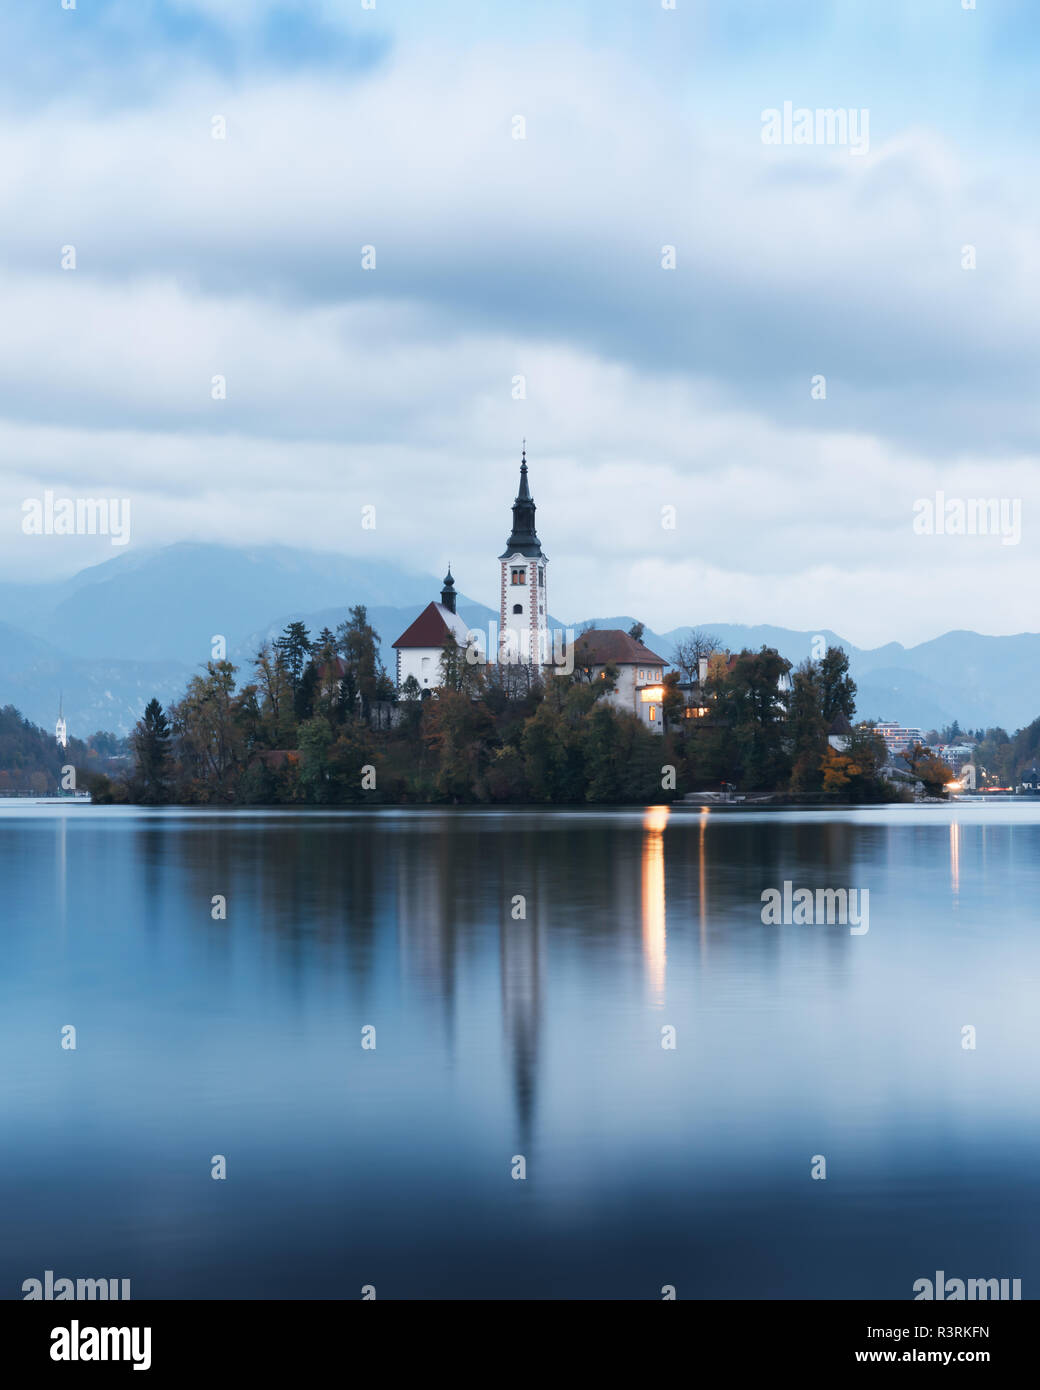 Evening autumn view of Bled lake in Julian Alps, Slovenia. Pilgrimage church of the Assumption of Maria on a foreground. Landscape photography Stock Photo